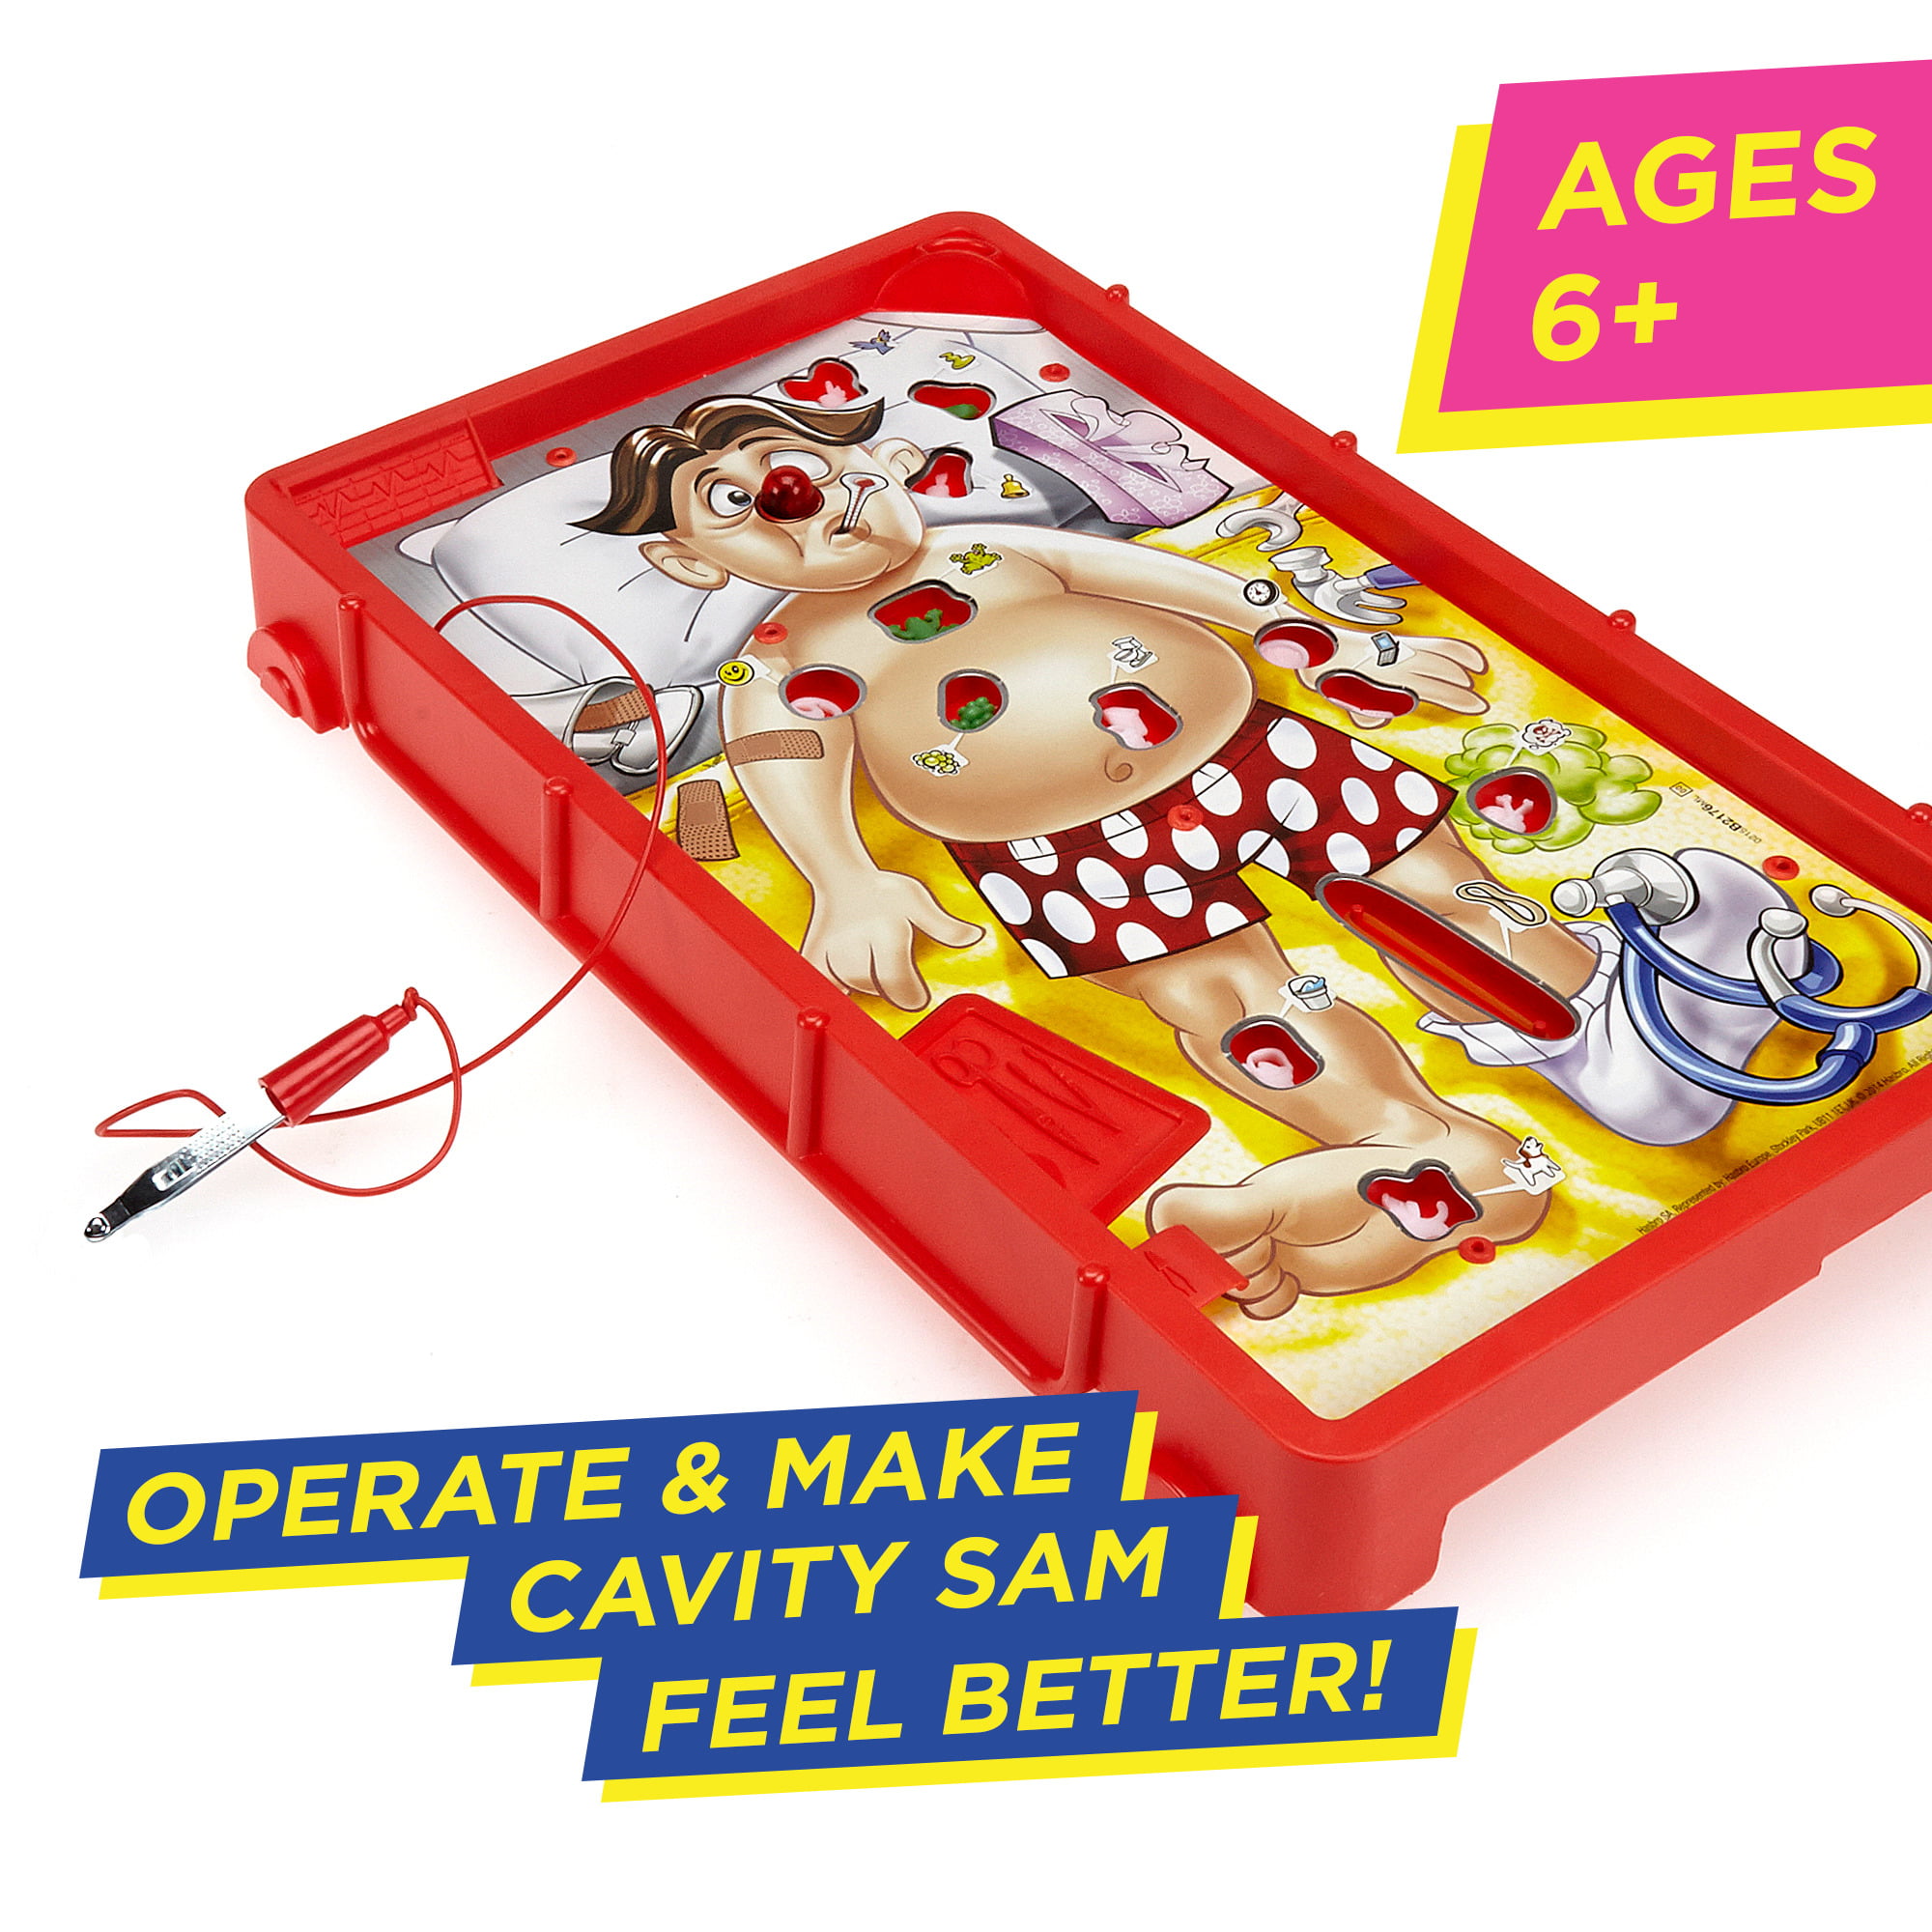 toy story operation game walmart